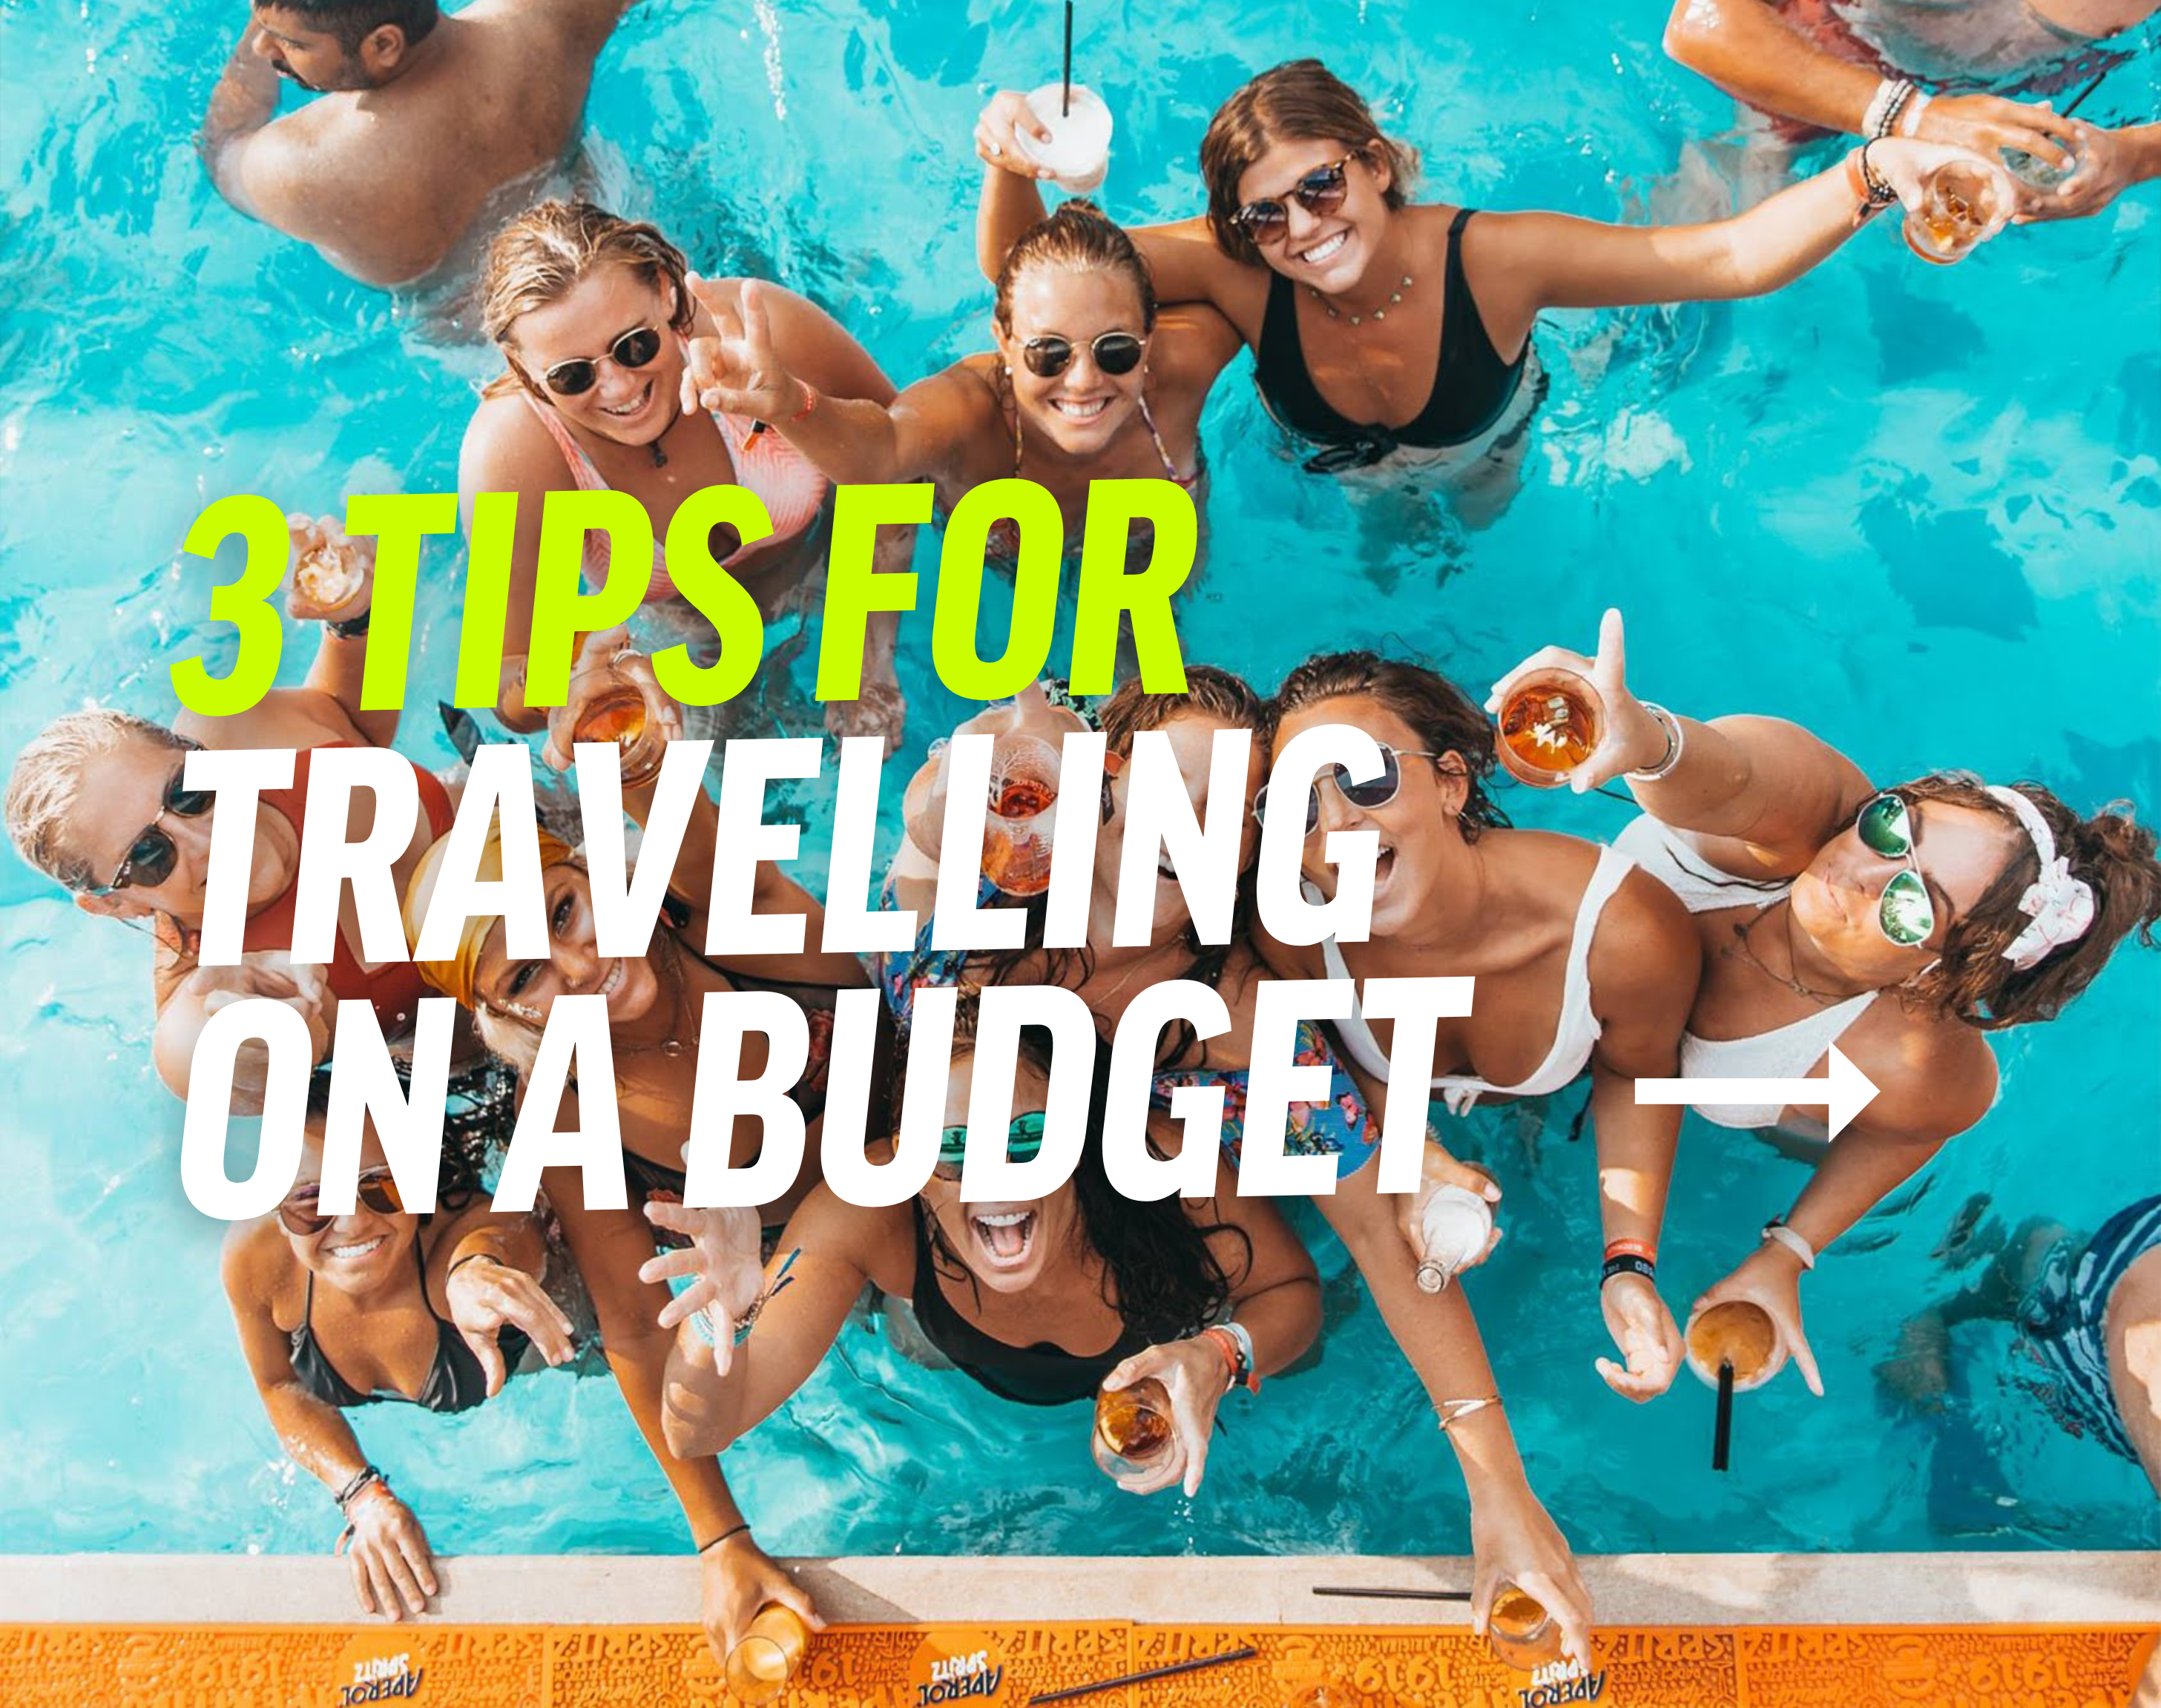 Budget Travel Tips - 3 Ways to Save Money While Exploring